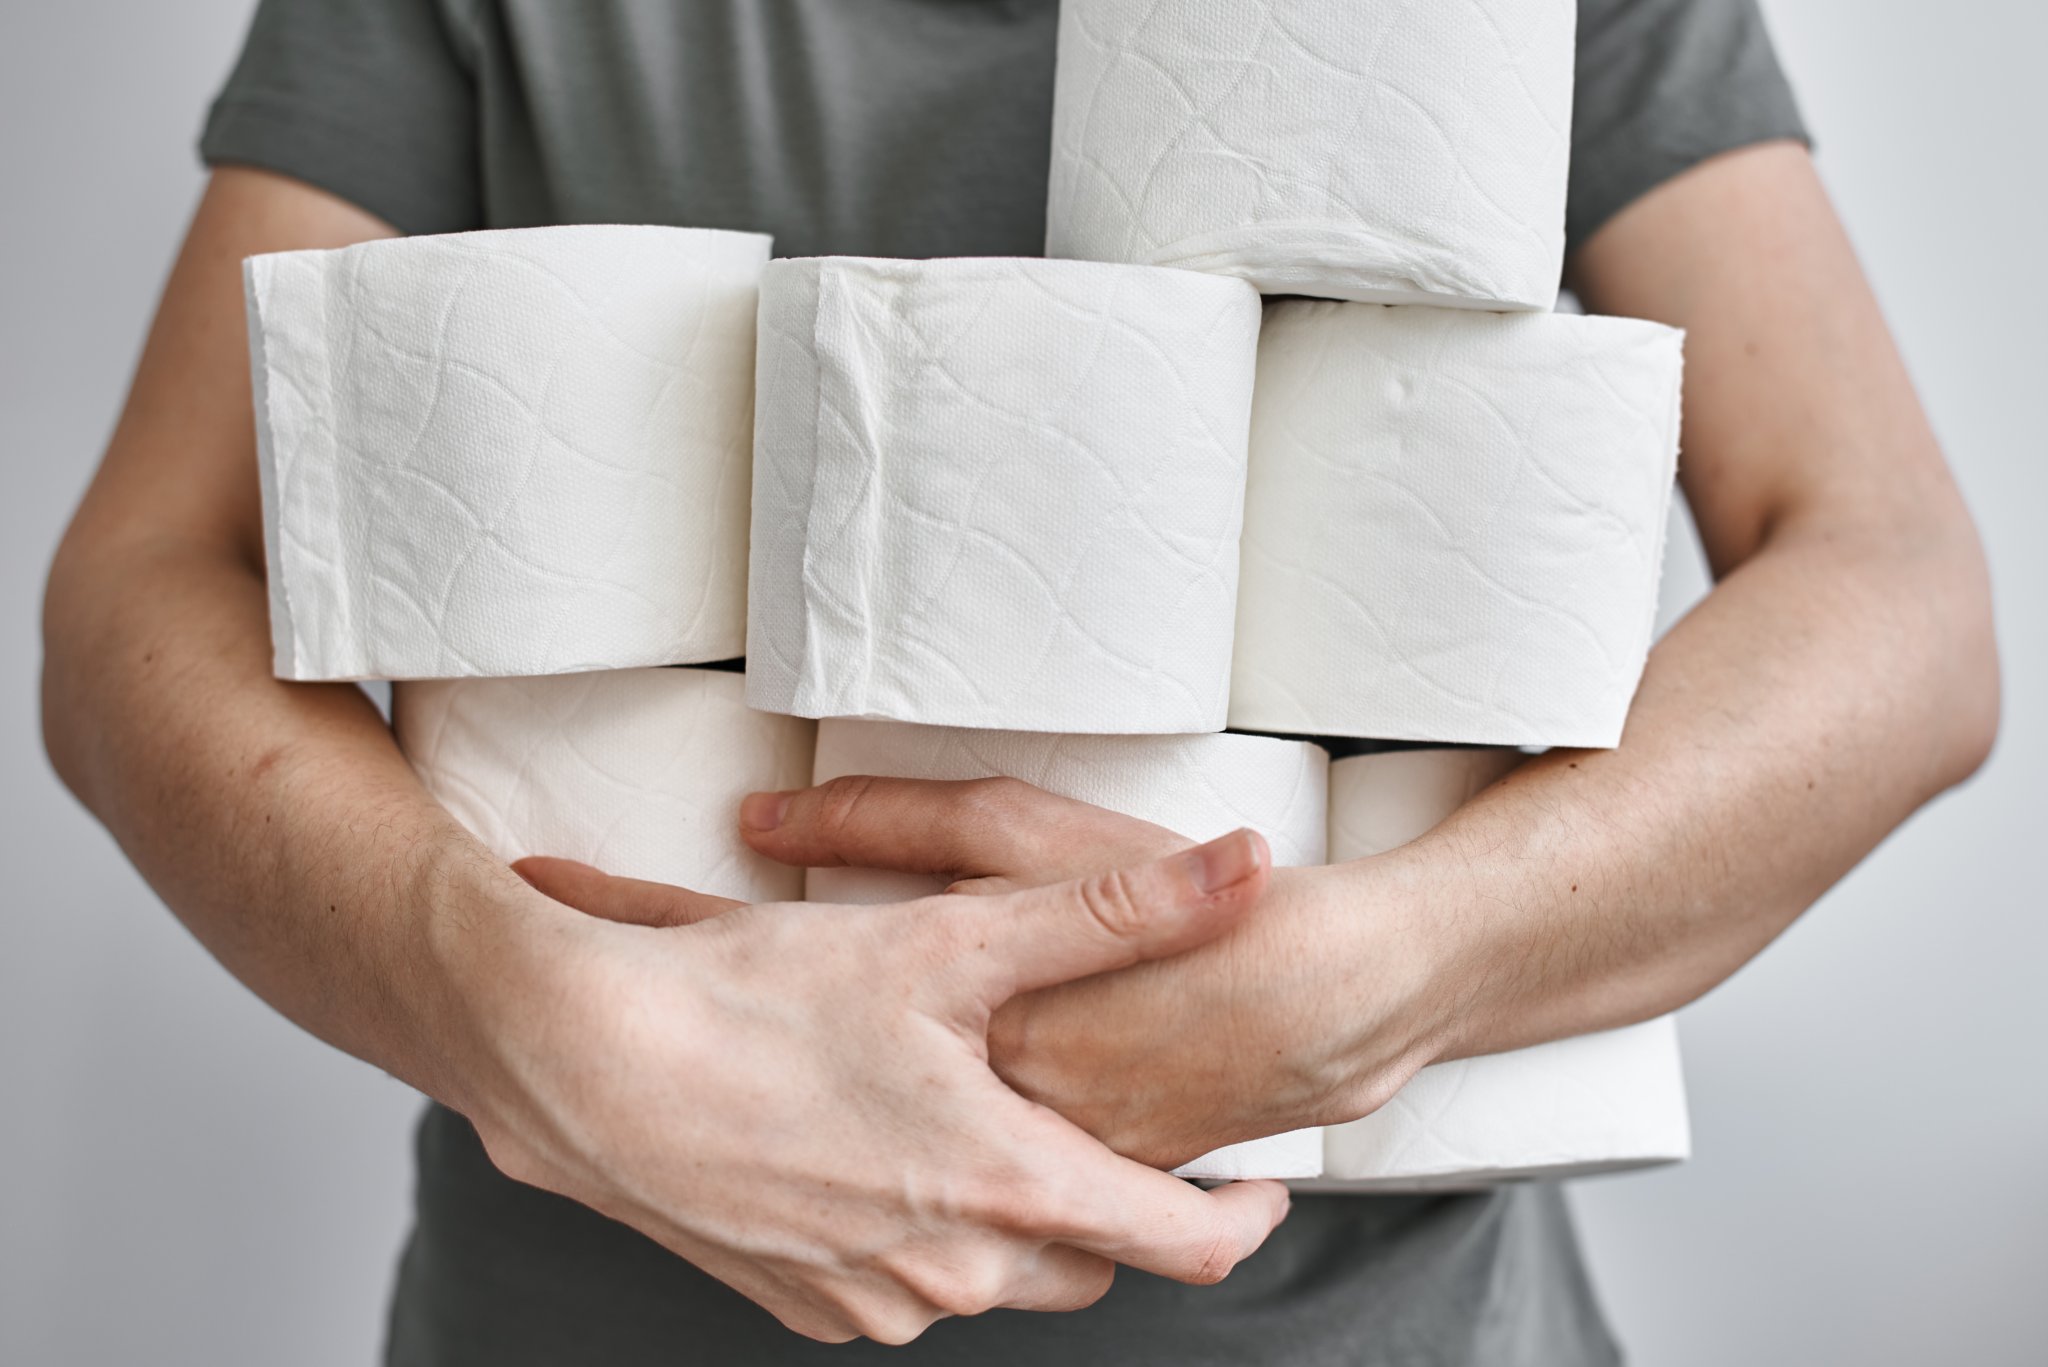 5 Mistakes You Might Make When You Wipe That Can Be Bad for Your Butt